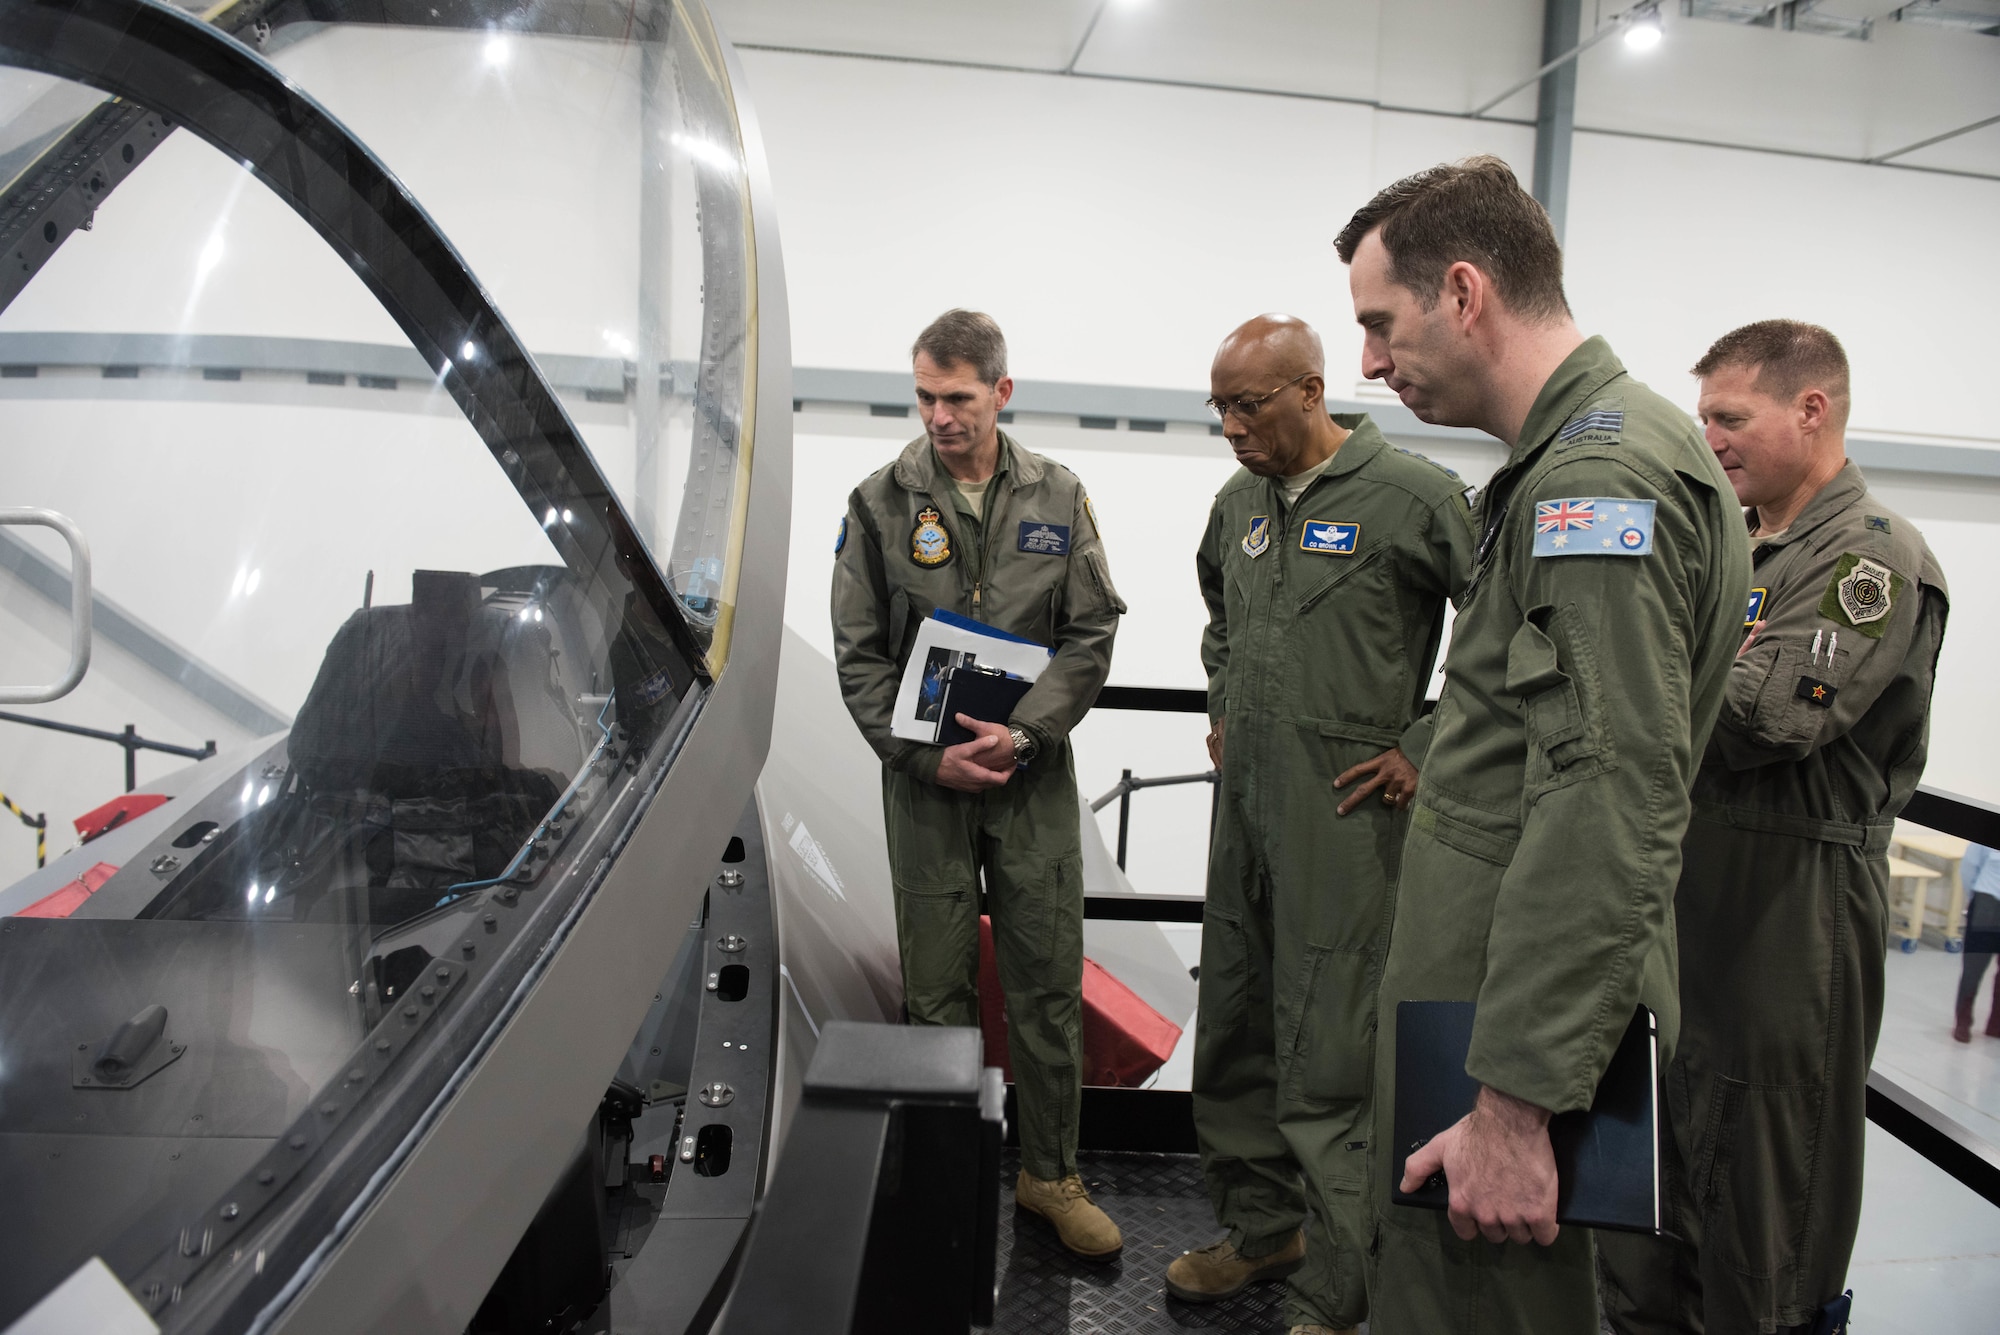 Gen. CQ Brown, Jr., Pacific Air Forces commander, receives a tour of the F-35 complex at Royal Australian Air Force Base Williamtown, Australia, Aug. 9, 2018. This was Brown’s first trip to the region since taking command on July 26, 2018. (U.S. Air Force photo by Staff Sgt. Hailey Haux)